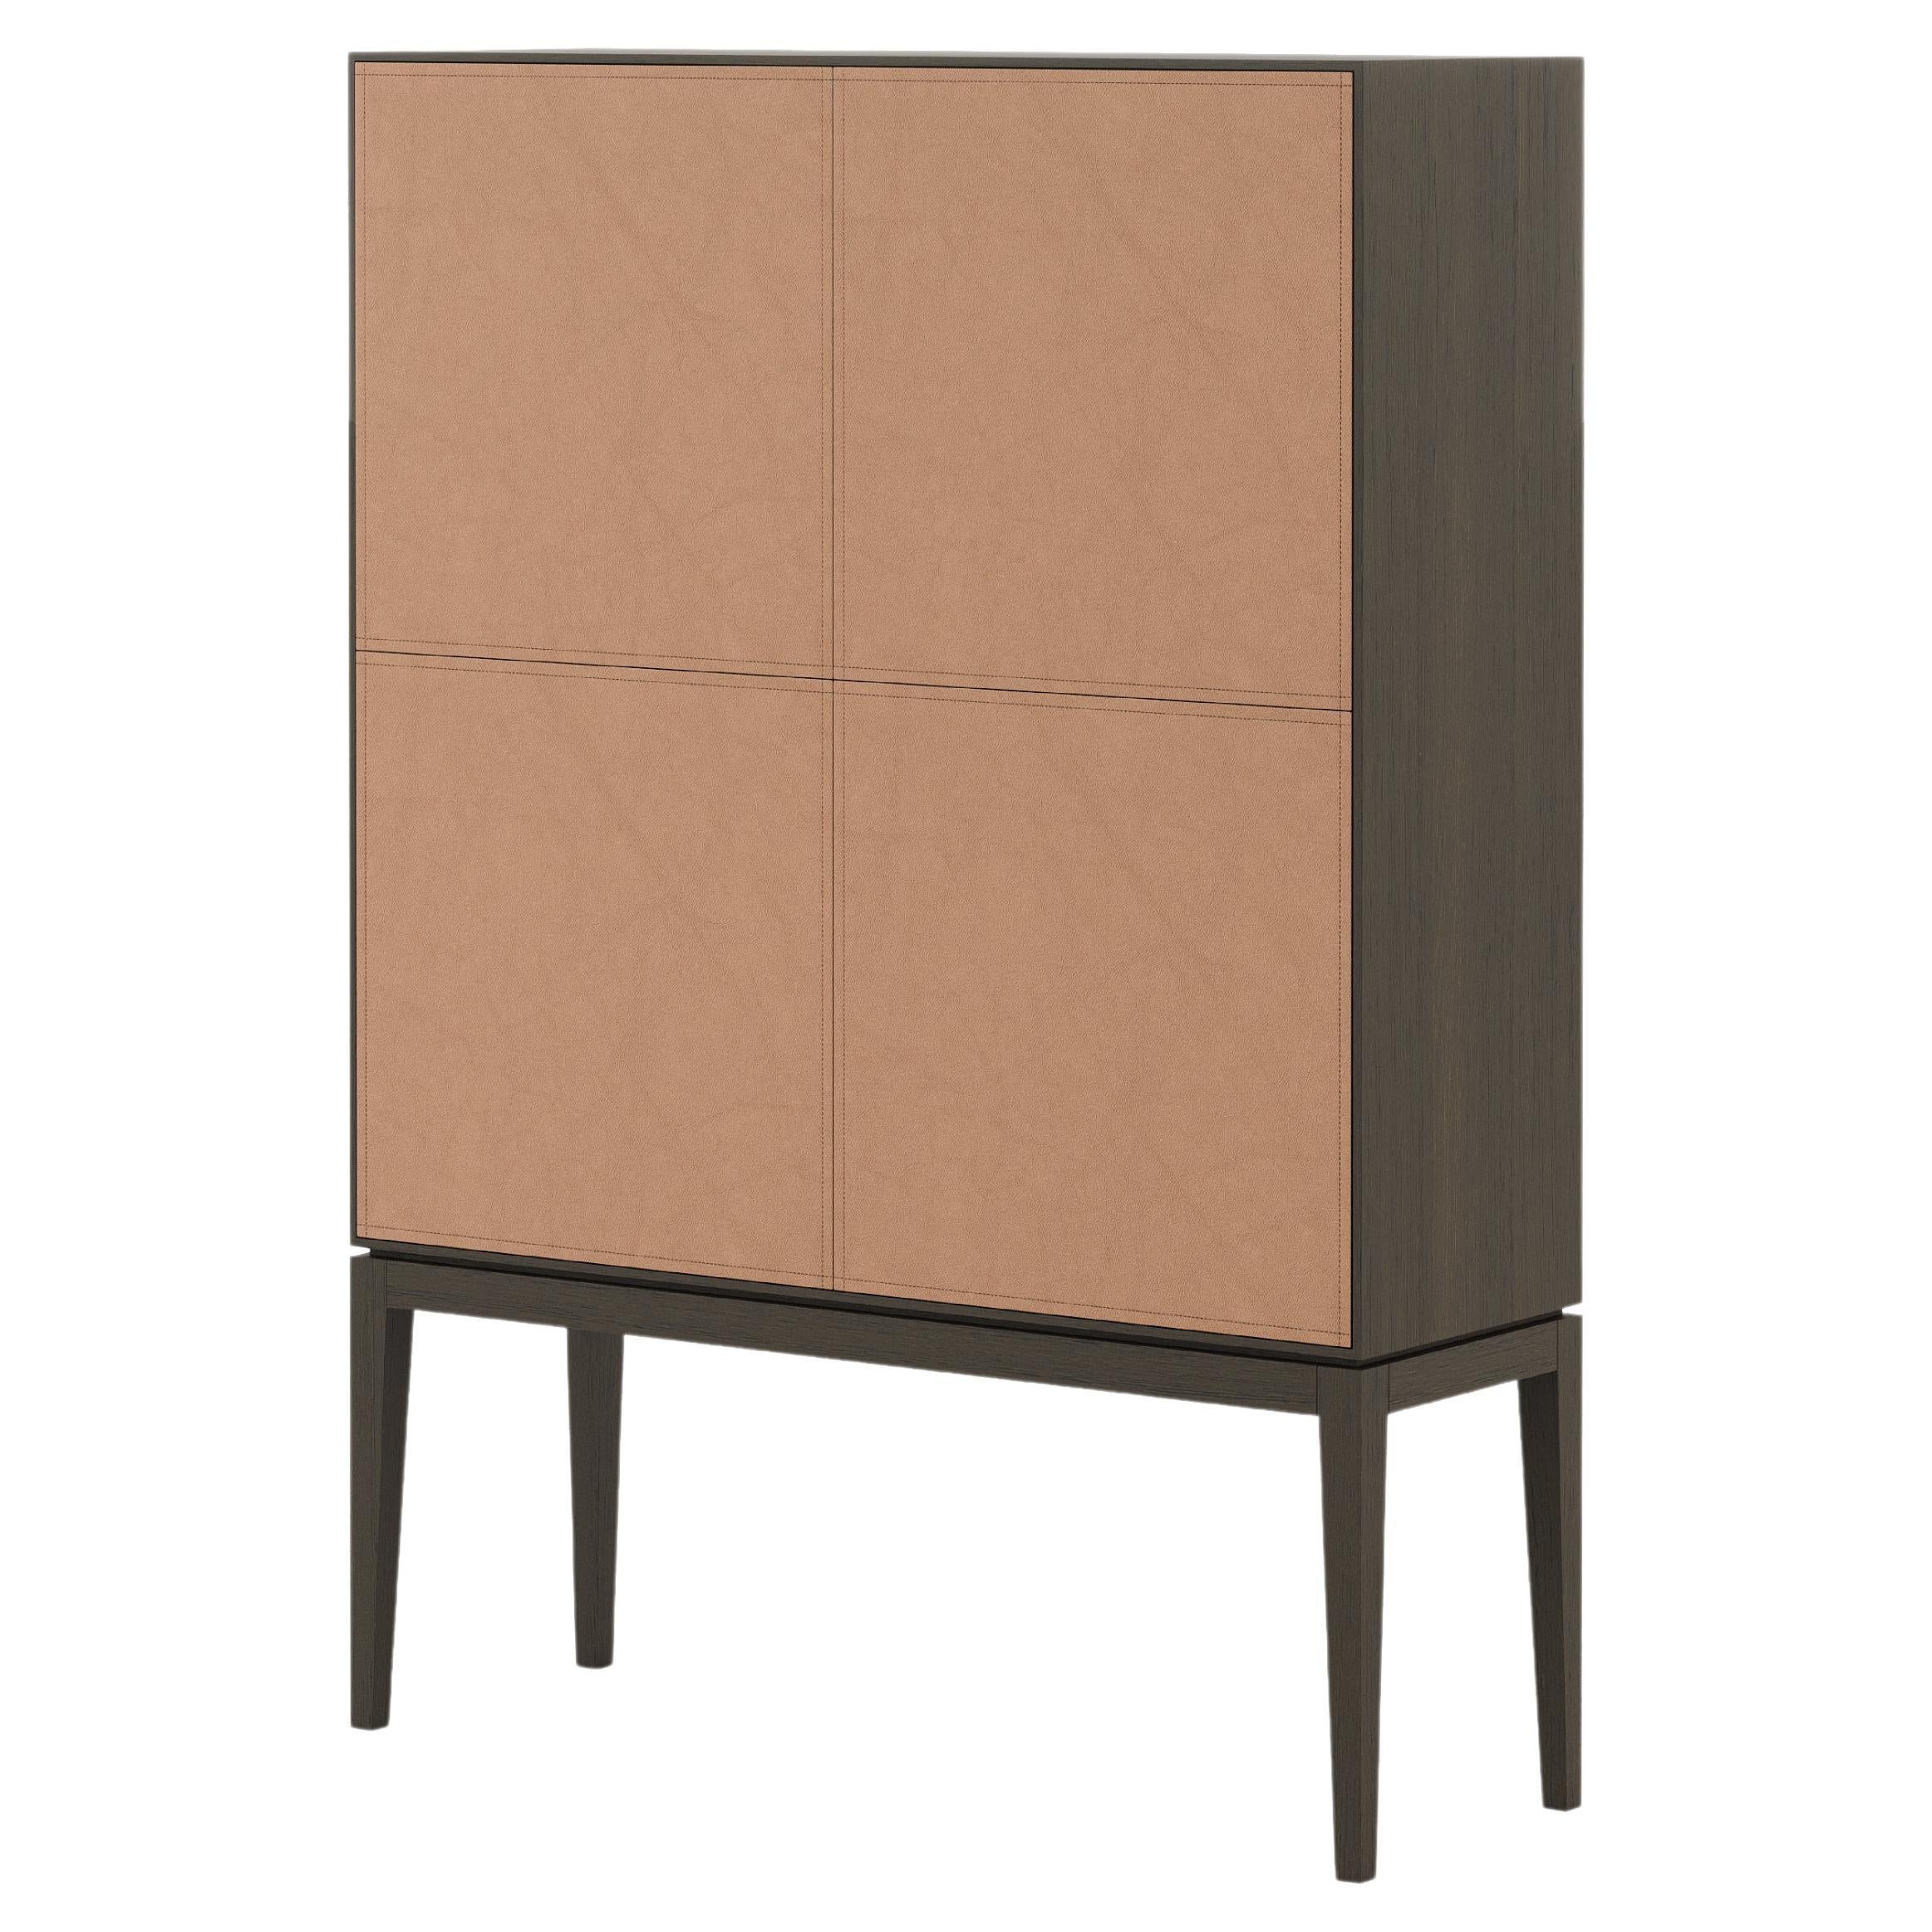 Mid-Century Modern Heritage Bar Cabinet Made with Oak and Leather Details For Sale